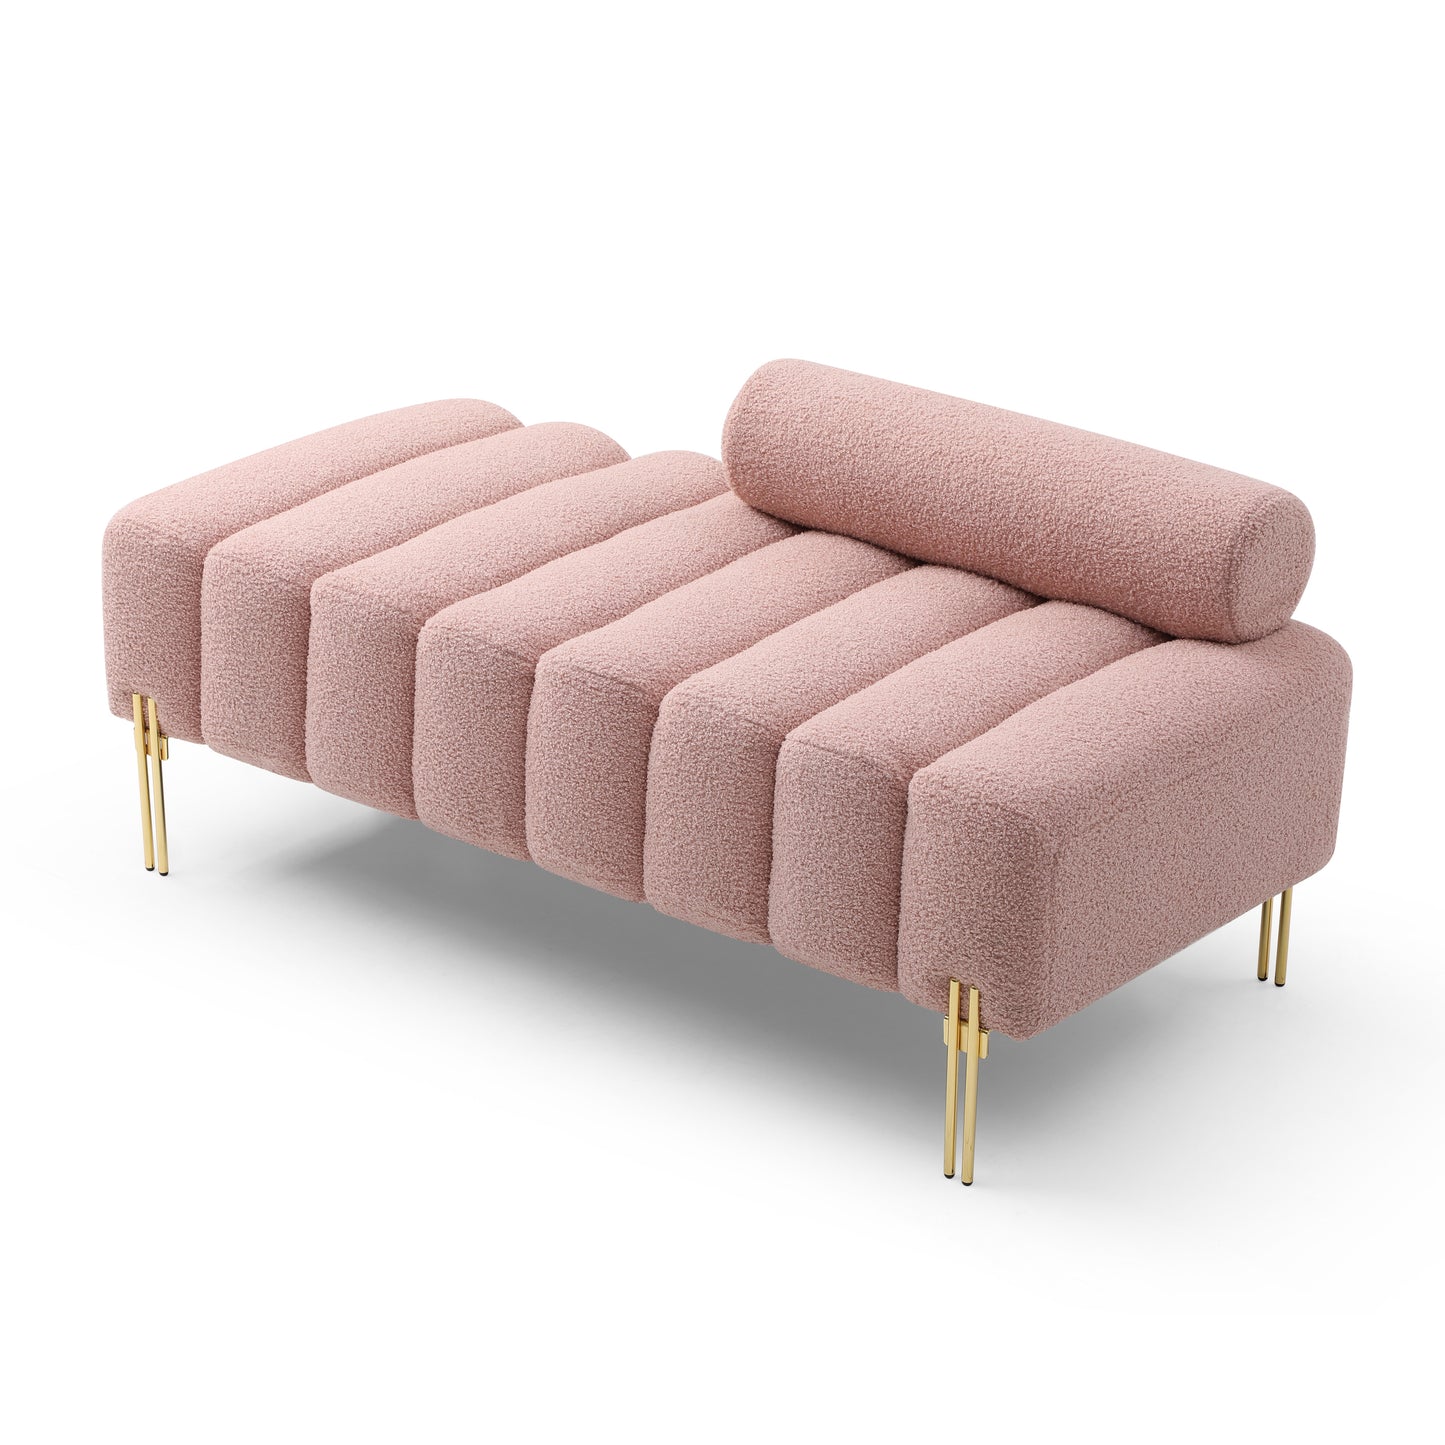 Channel Upholstered Faux Sherpa Bench